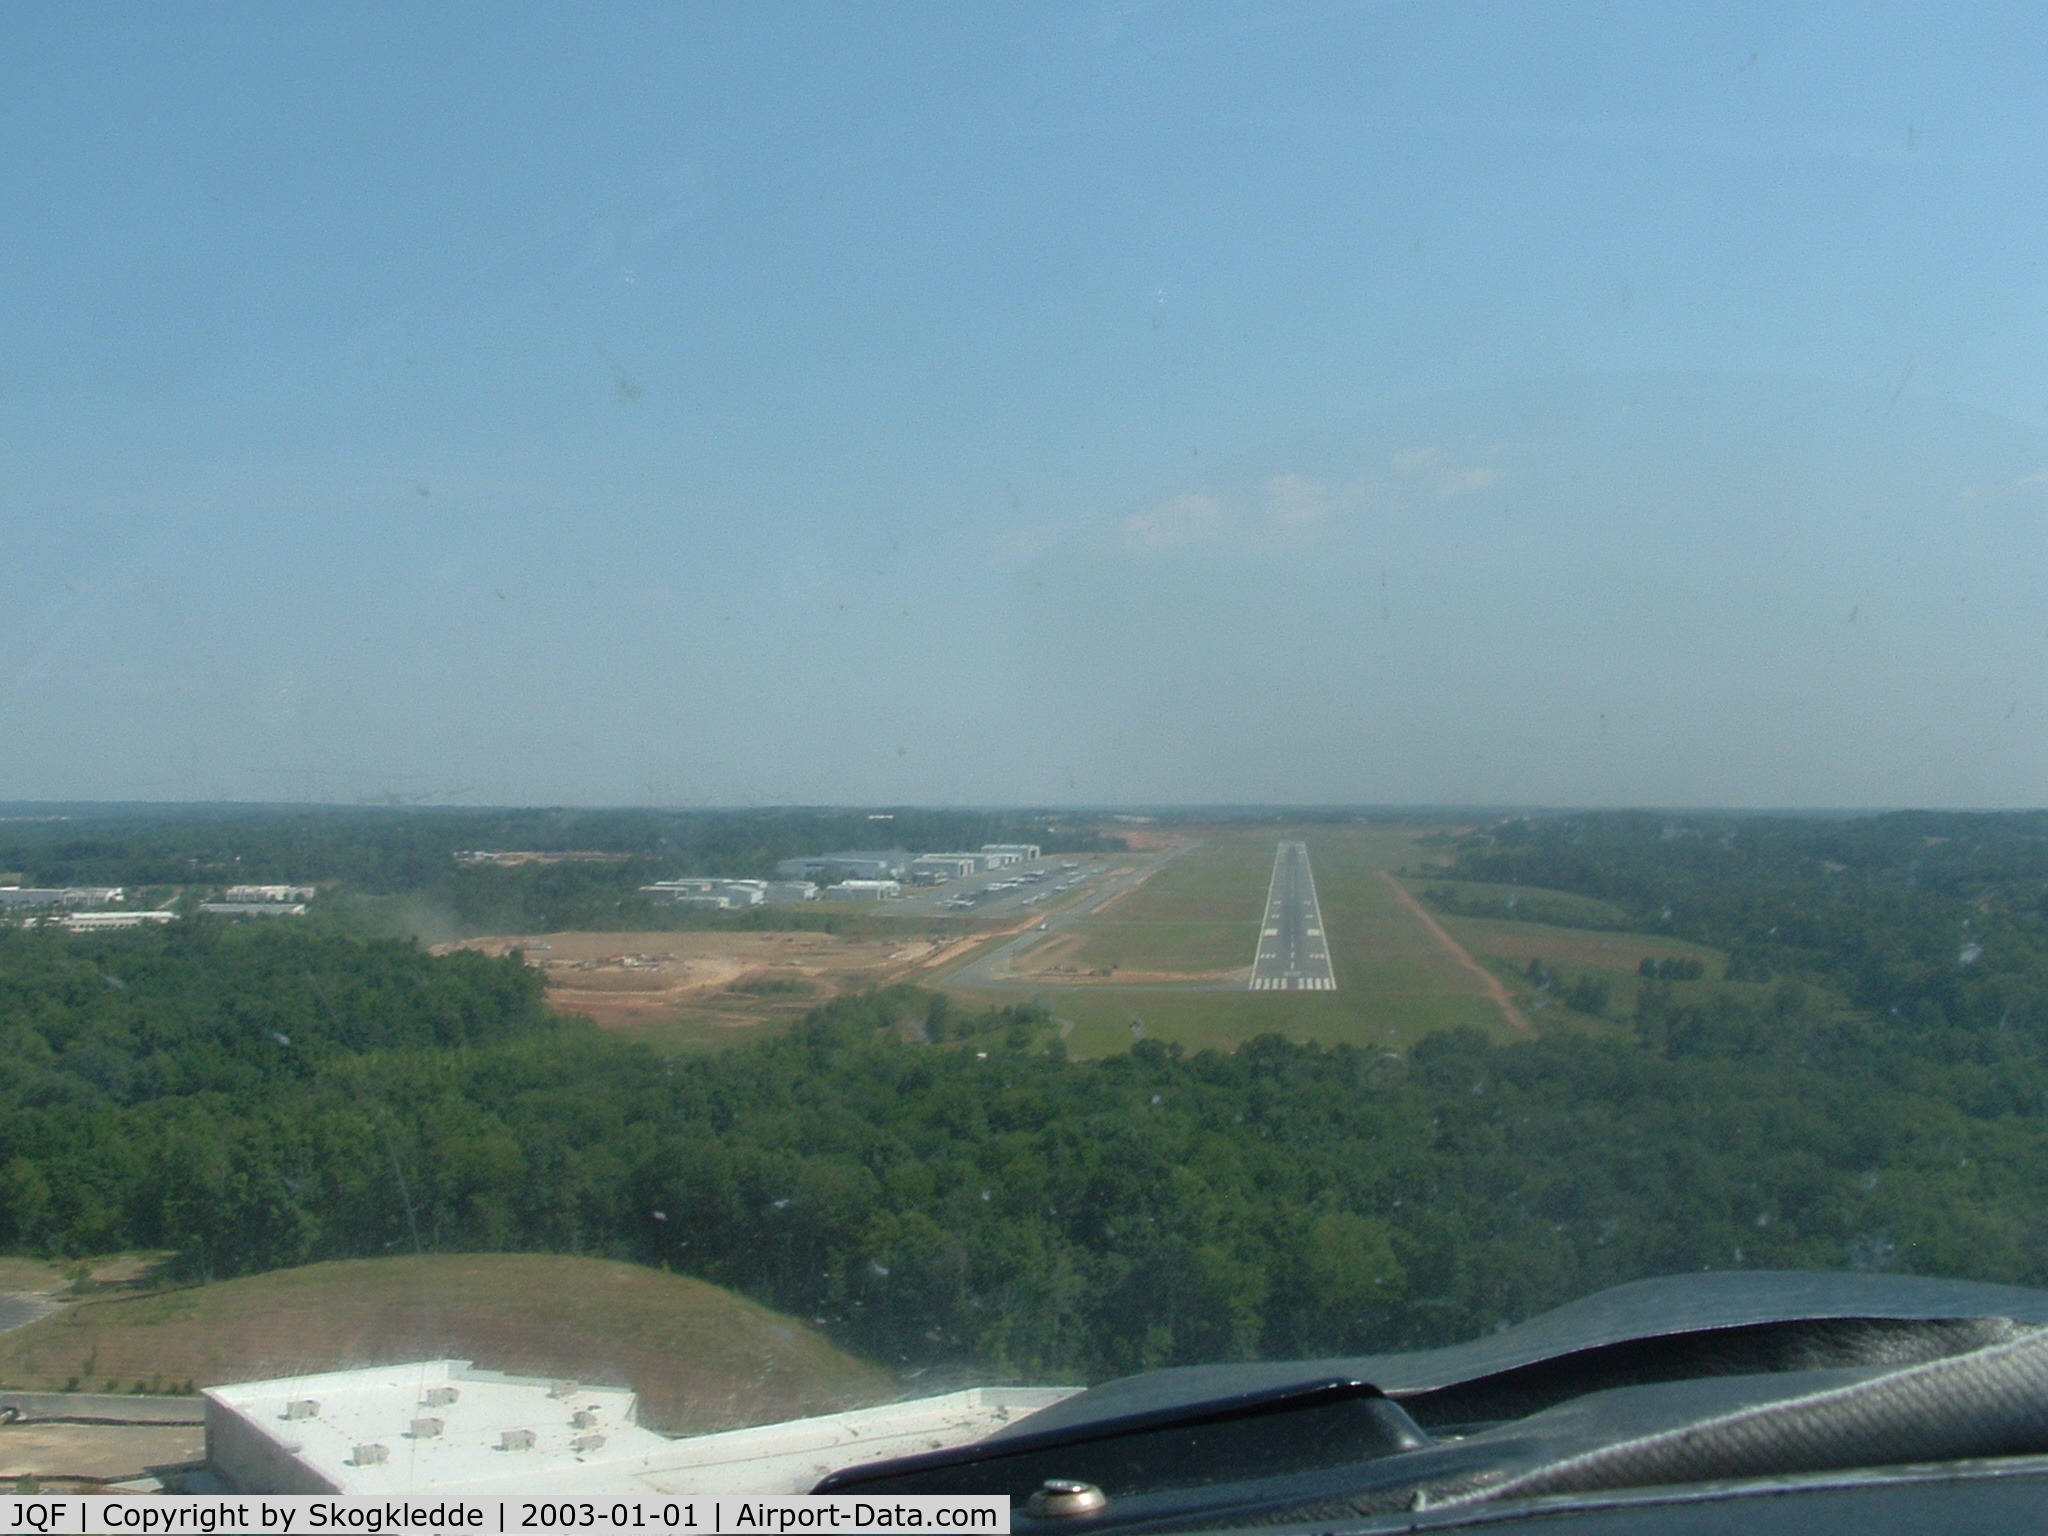 Concord Regional Airport (JQF) - JQF as seen on approach